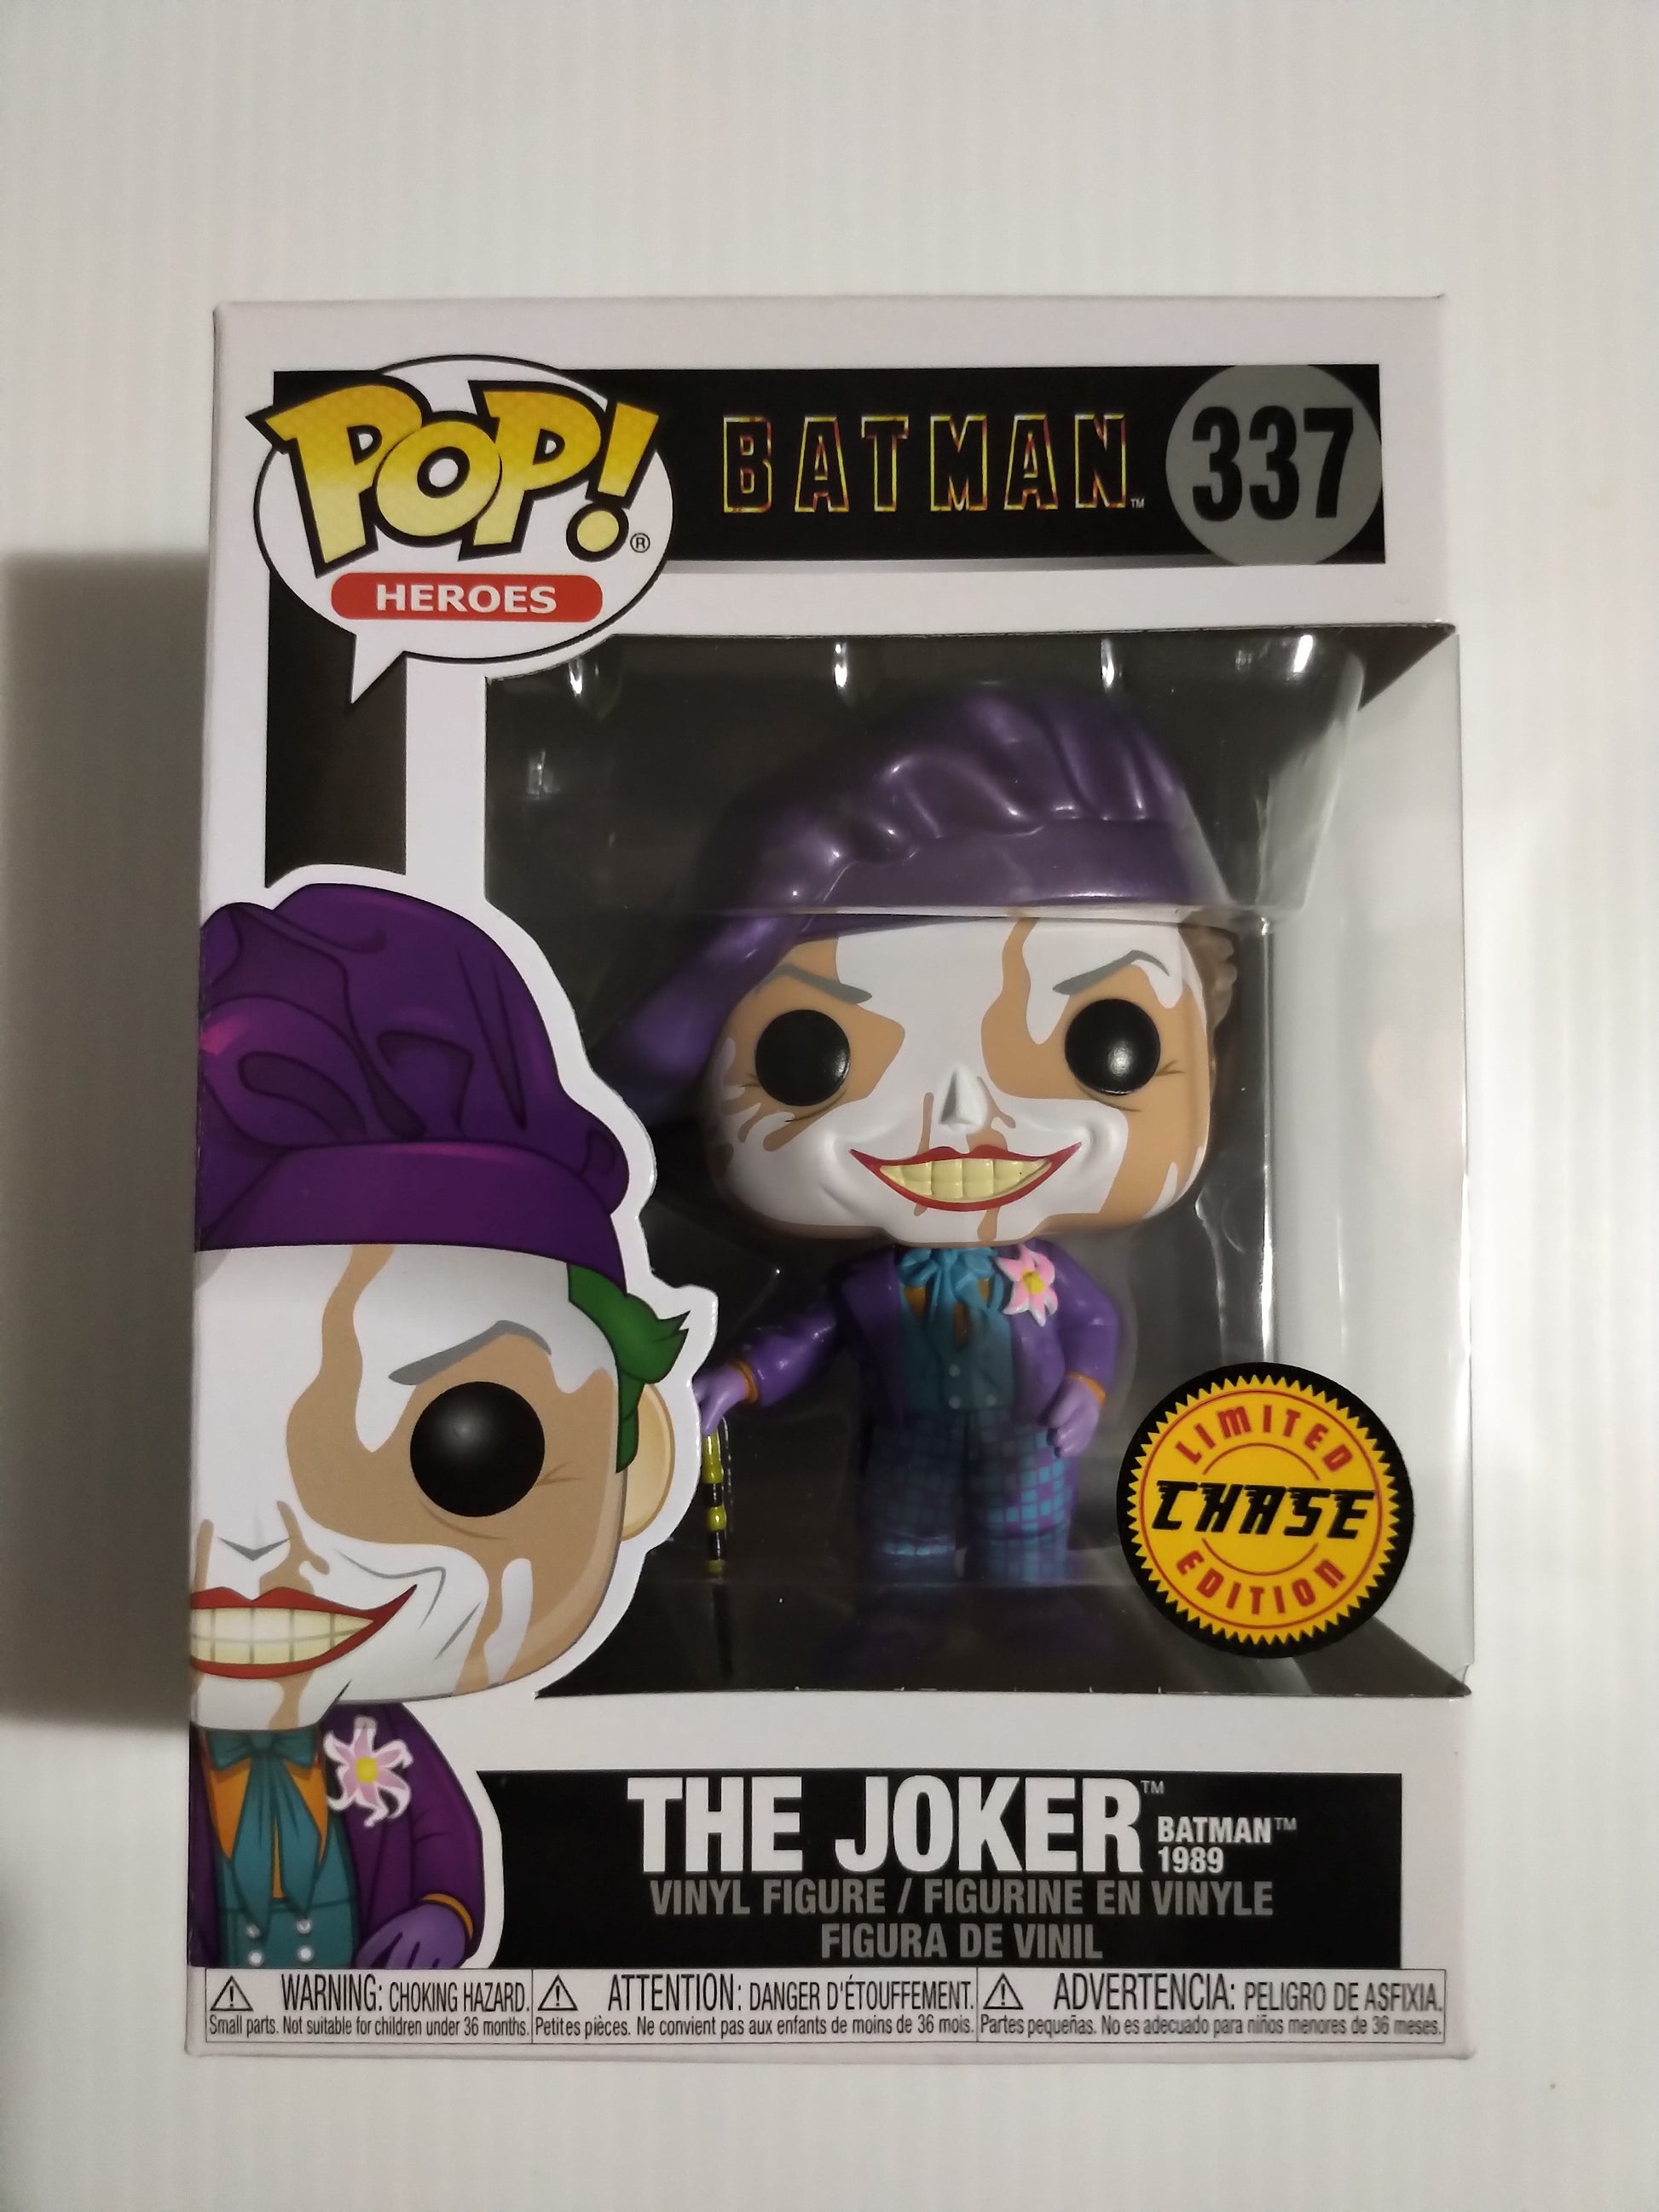 Funko DC Heroes Batman Action Figure (Limited Edition Chase) 